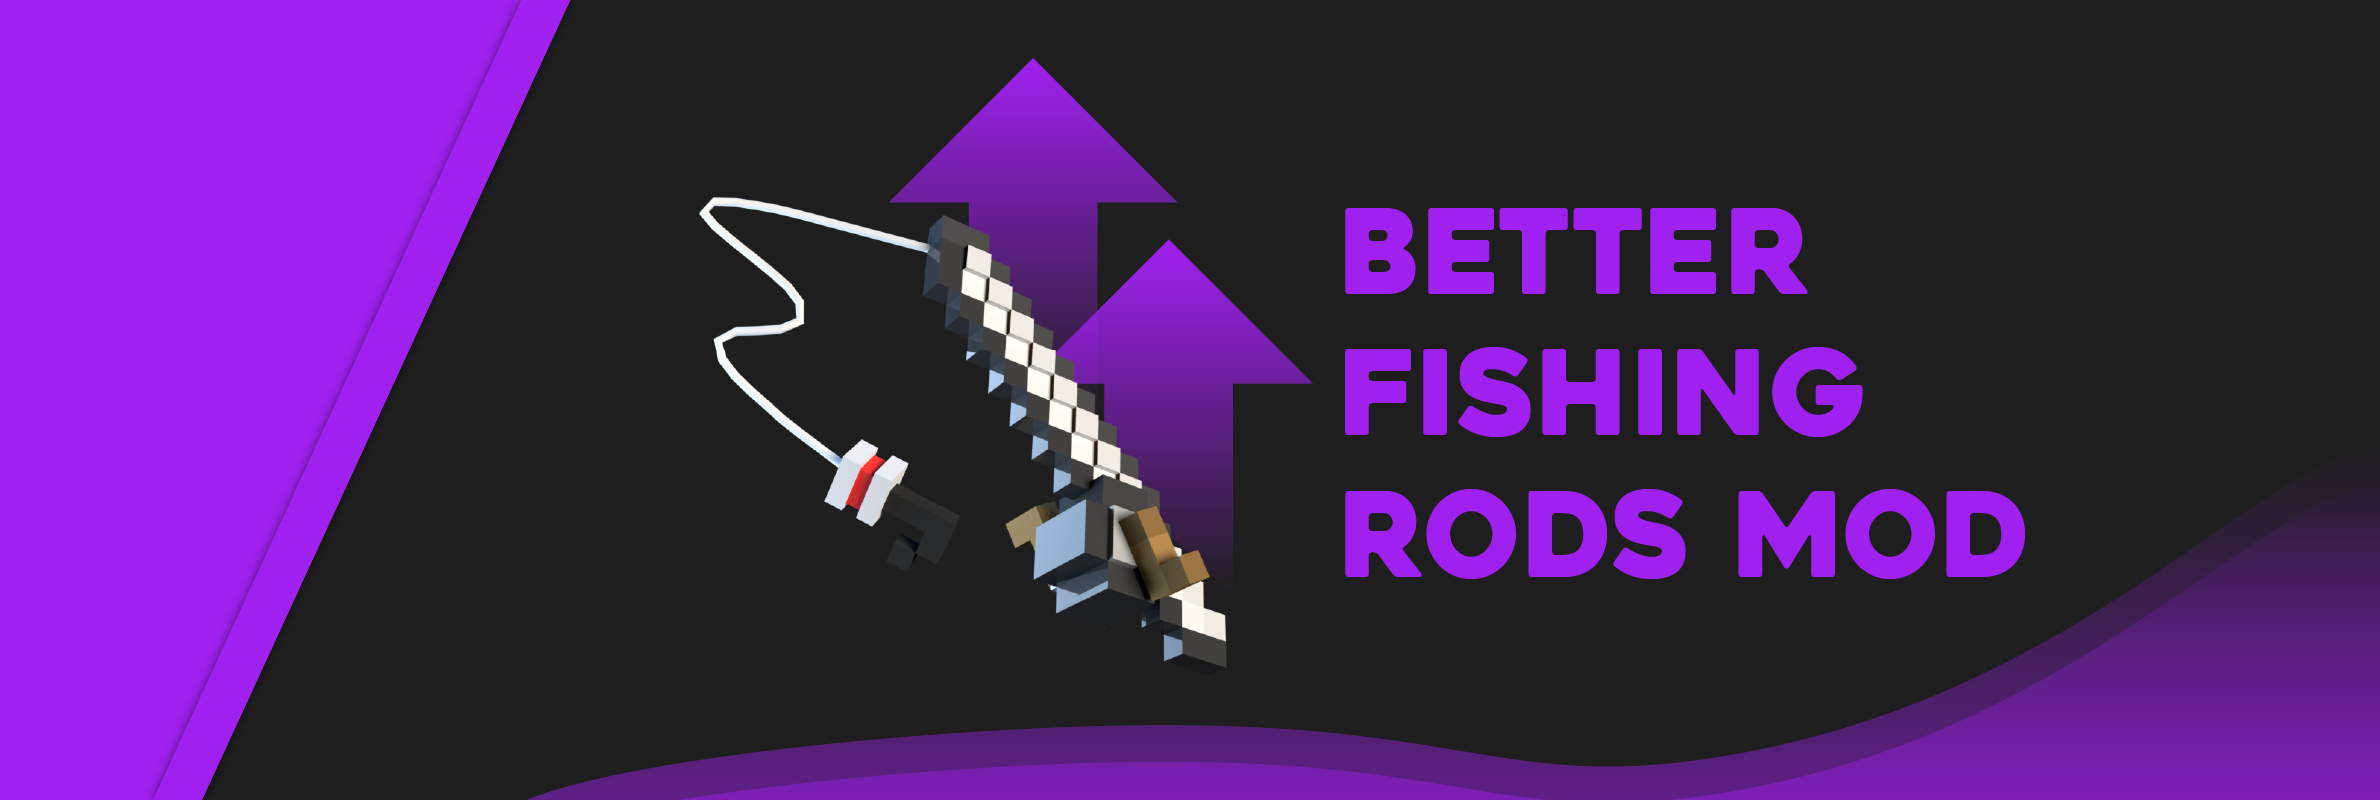 Fishing Made Better - Minecraft Mods - CurseForge